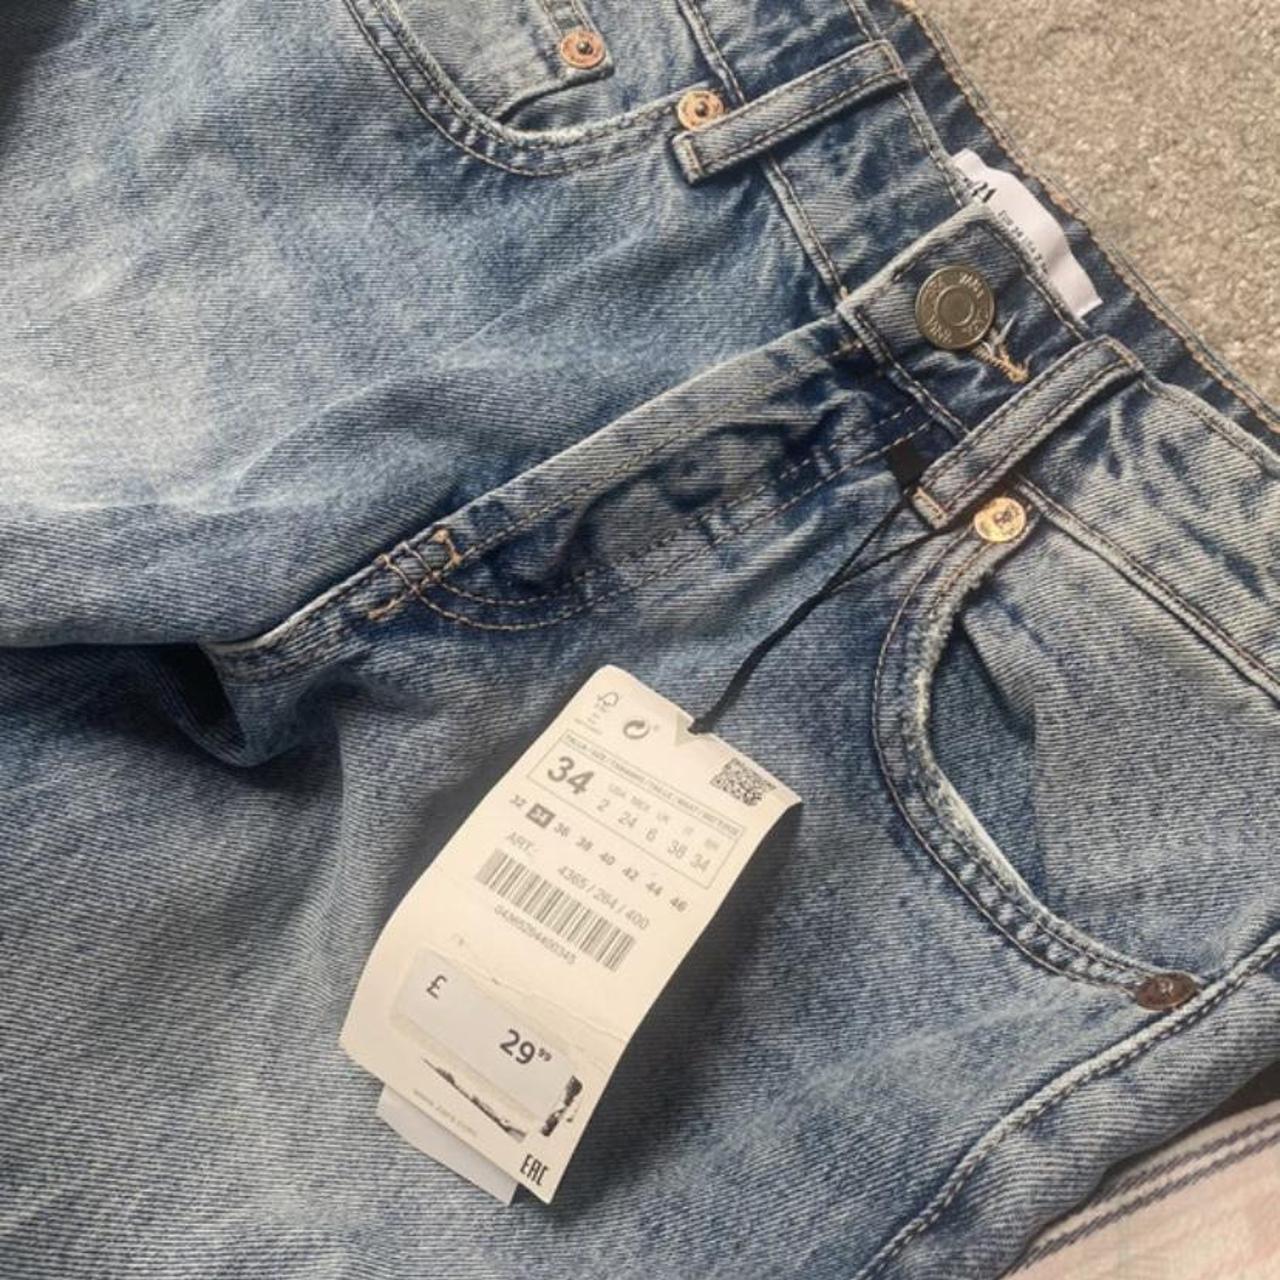 Zara low rise jeans Brand new Size 6 (Picture Of me... - Depop